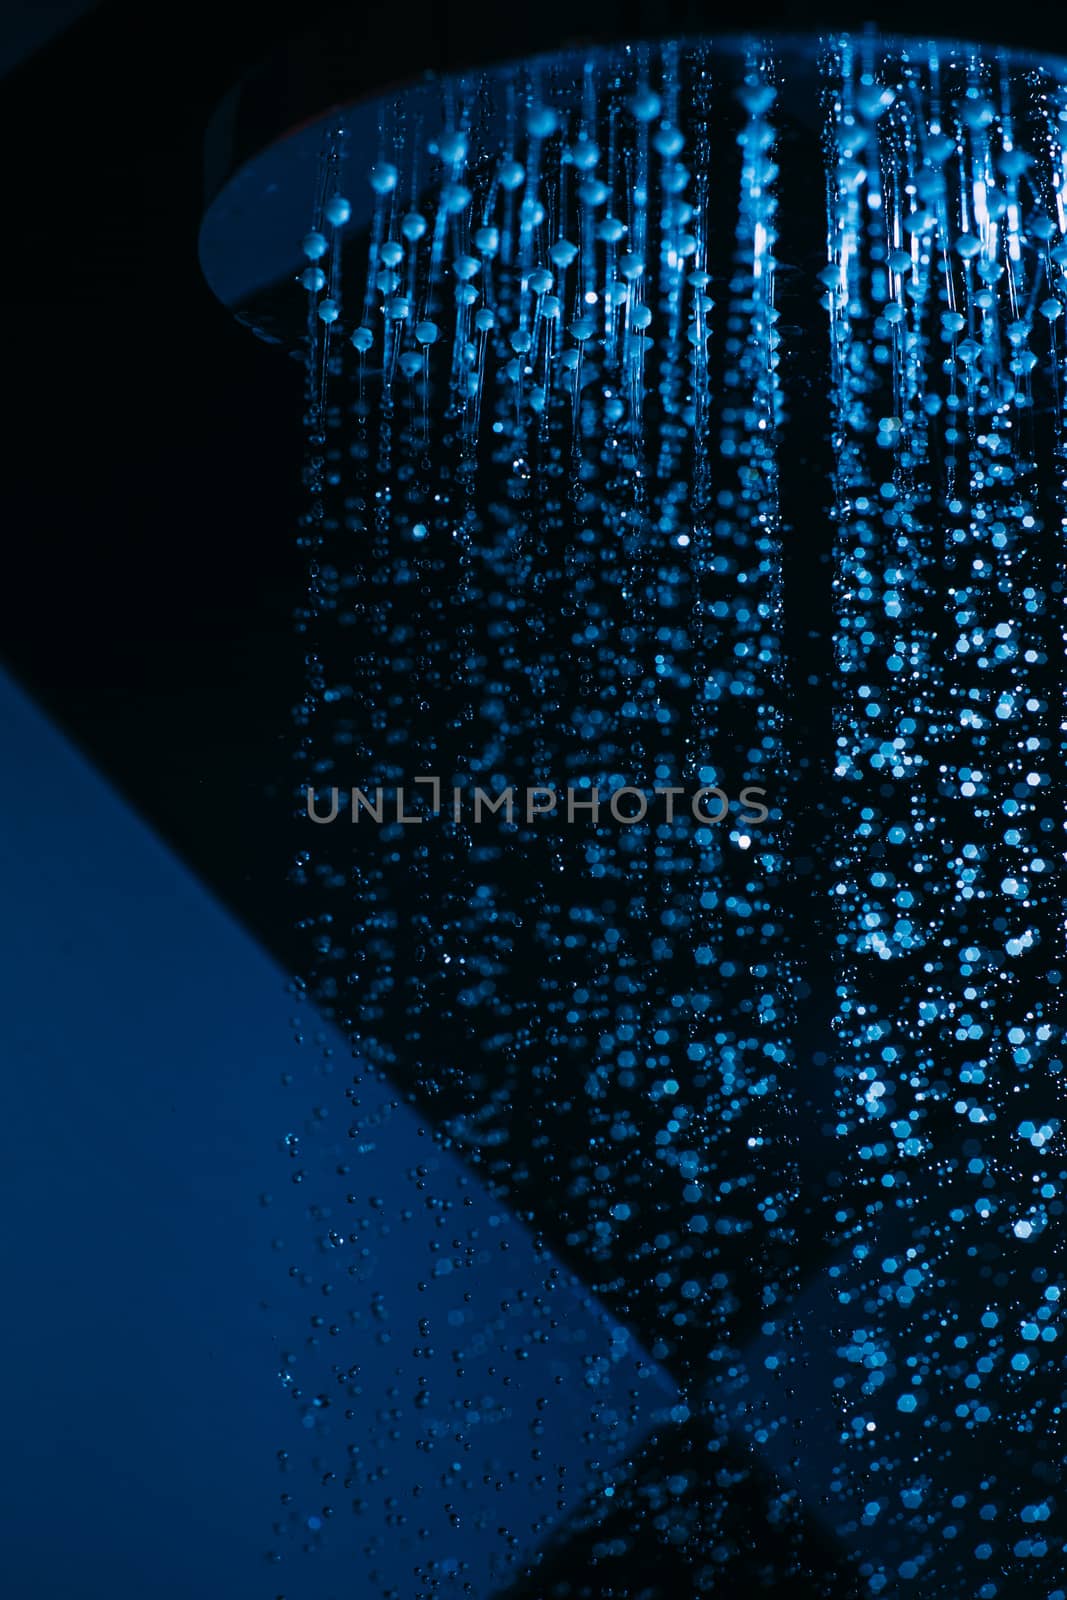 Drops of water fall from a watering can in the shower in blue li by Opikanets